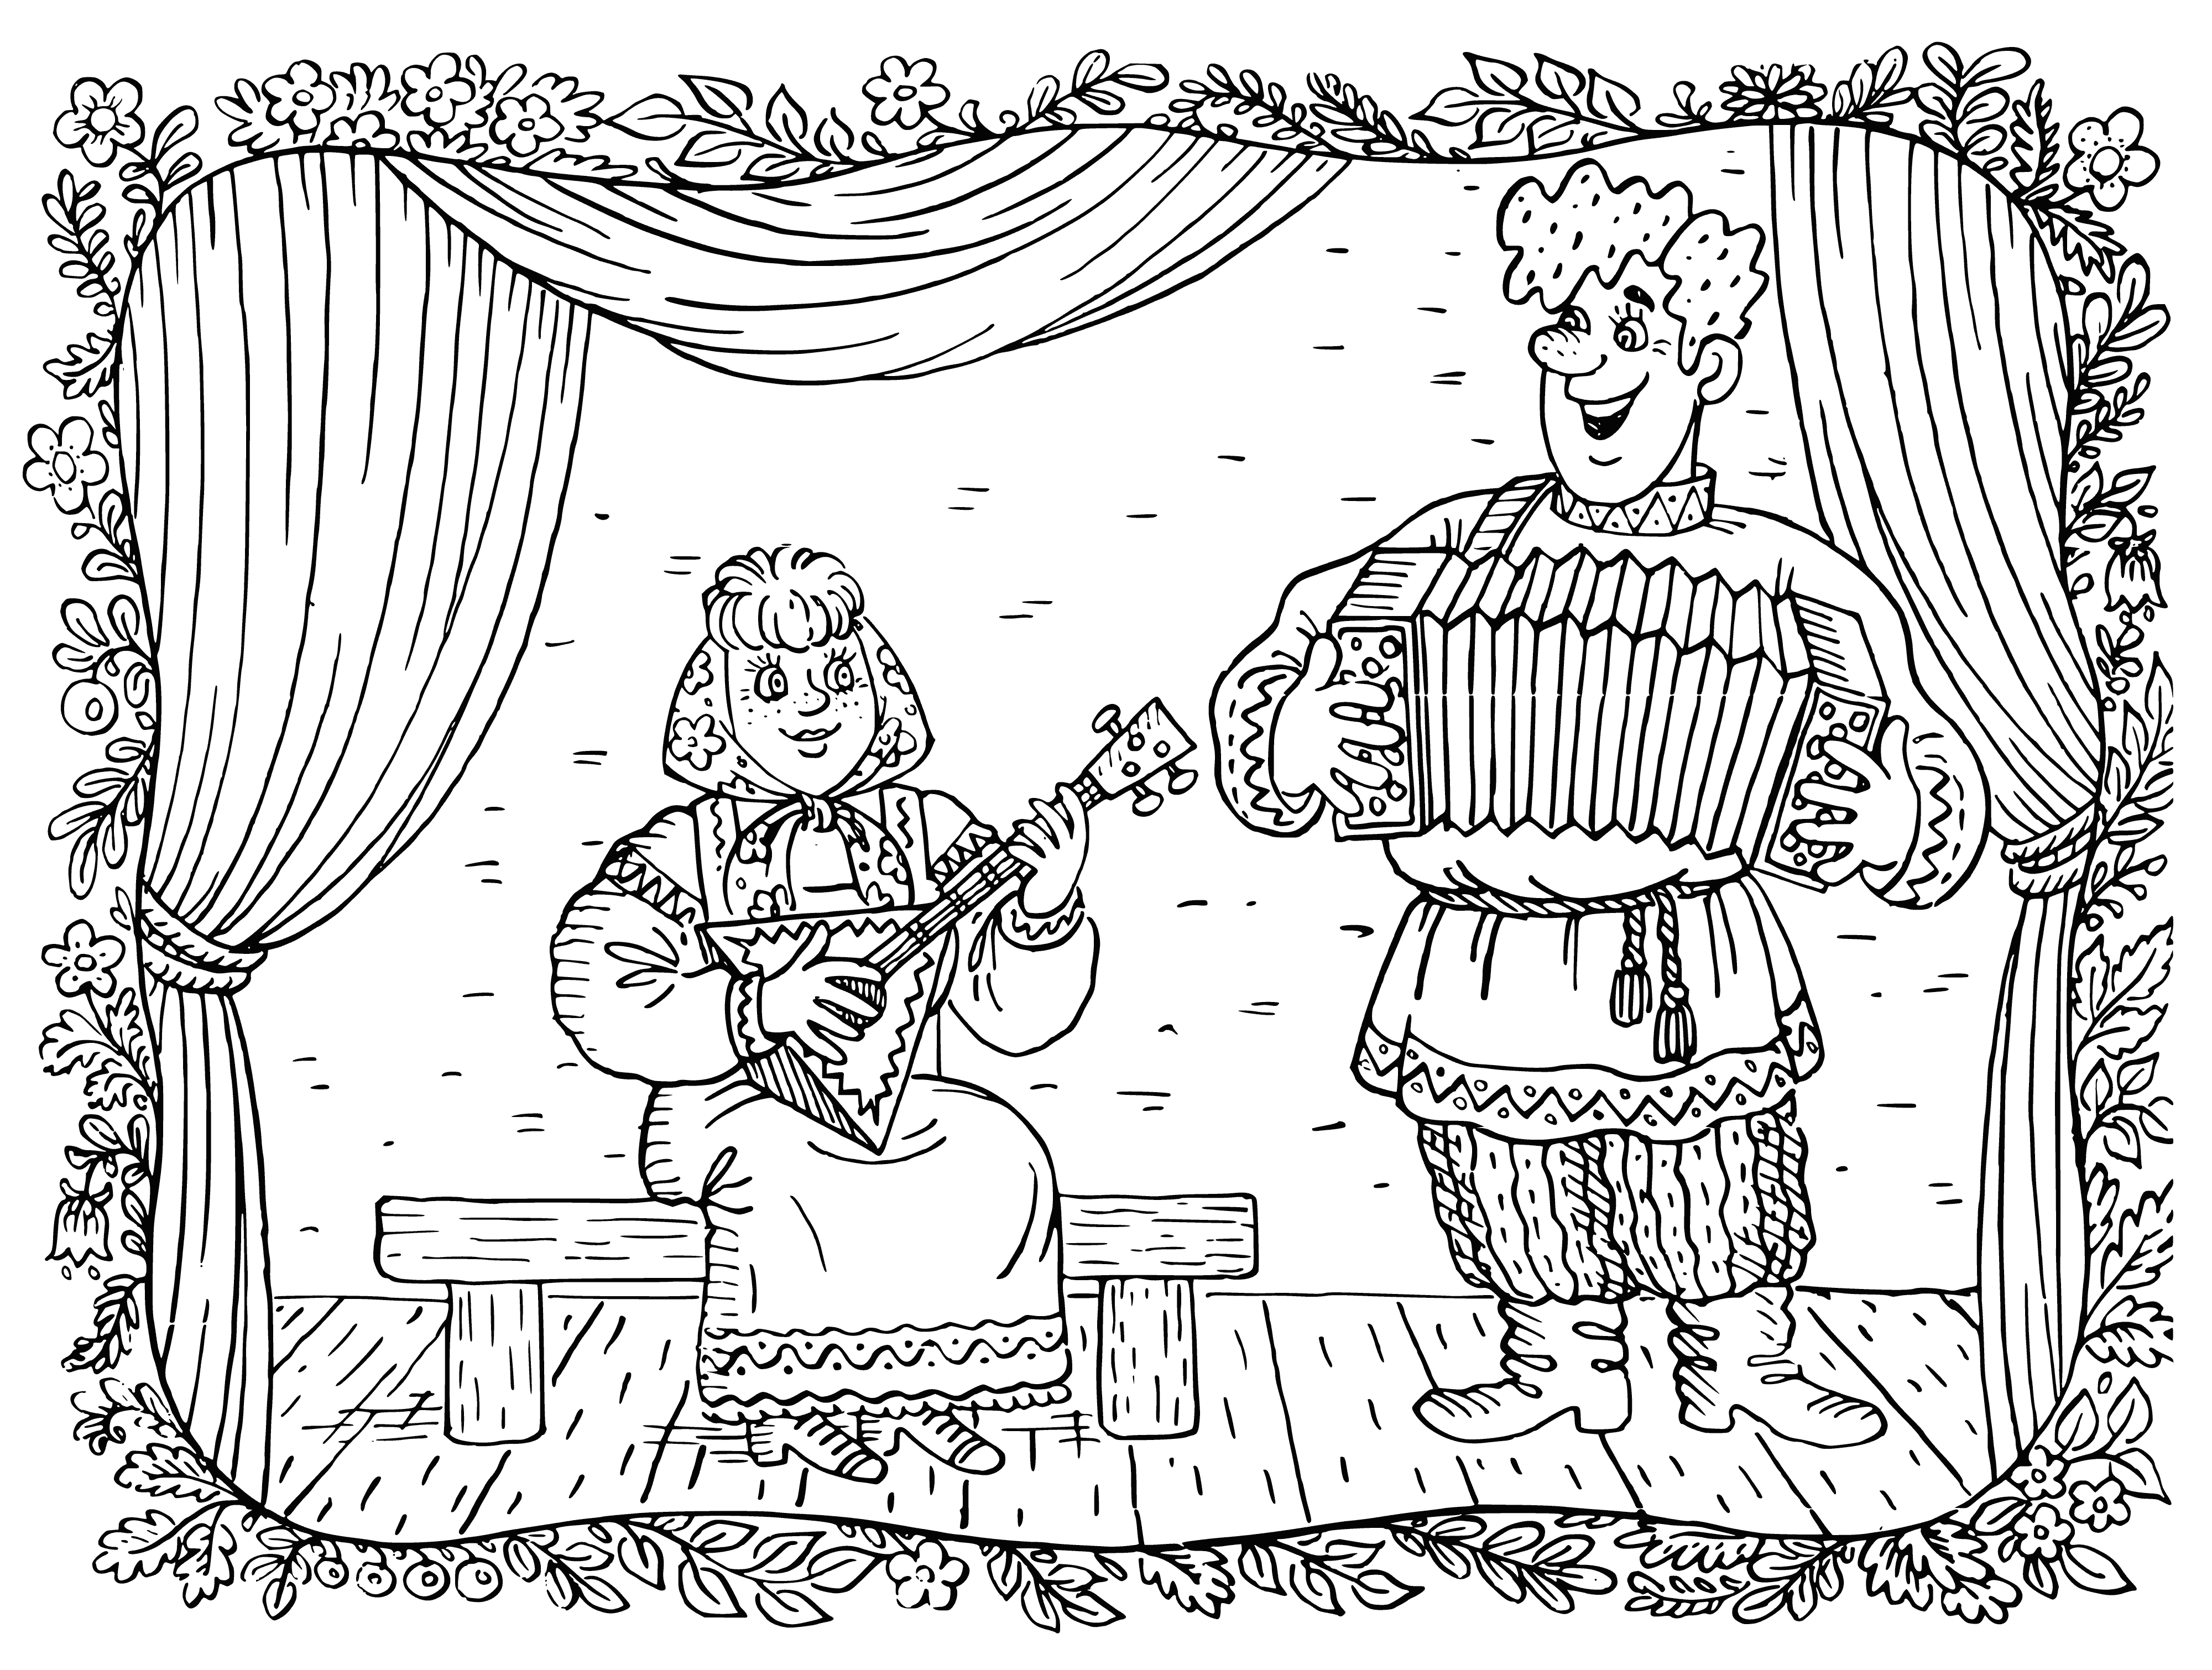 coloring page: Group of folk musicians playing concert on stage, wearing traditional folk clothing - man playing flute, woman violin, man bass, woman drums. #folkmusic